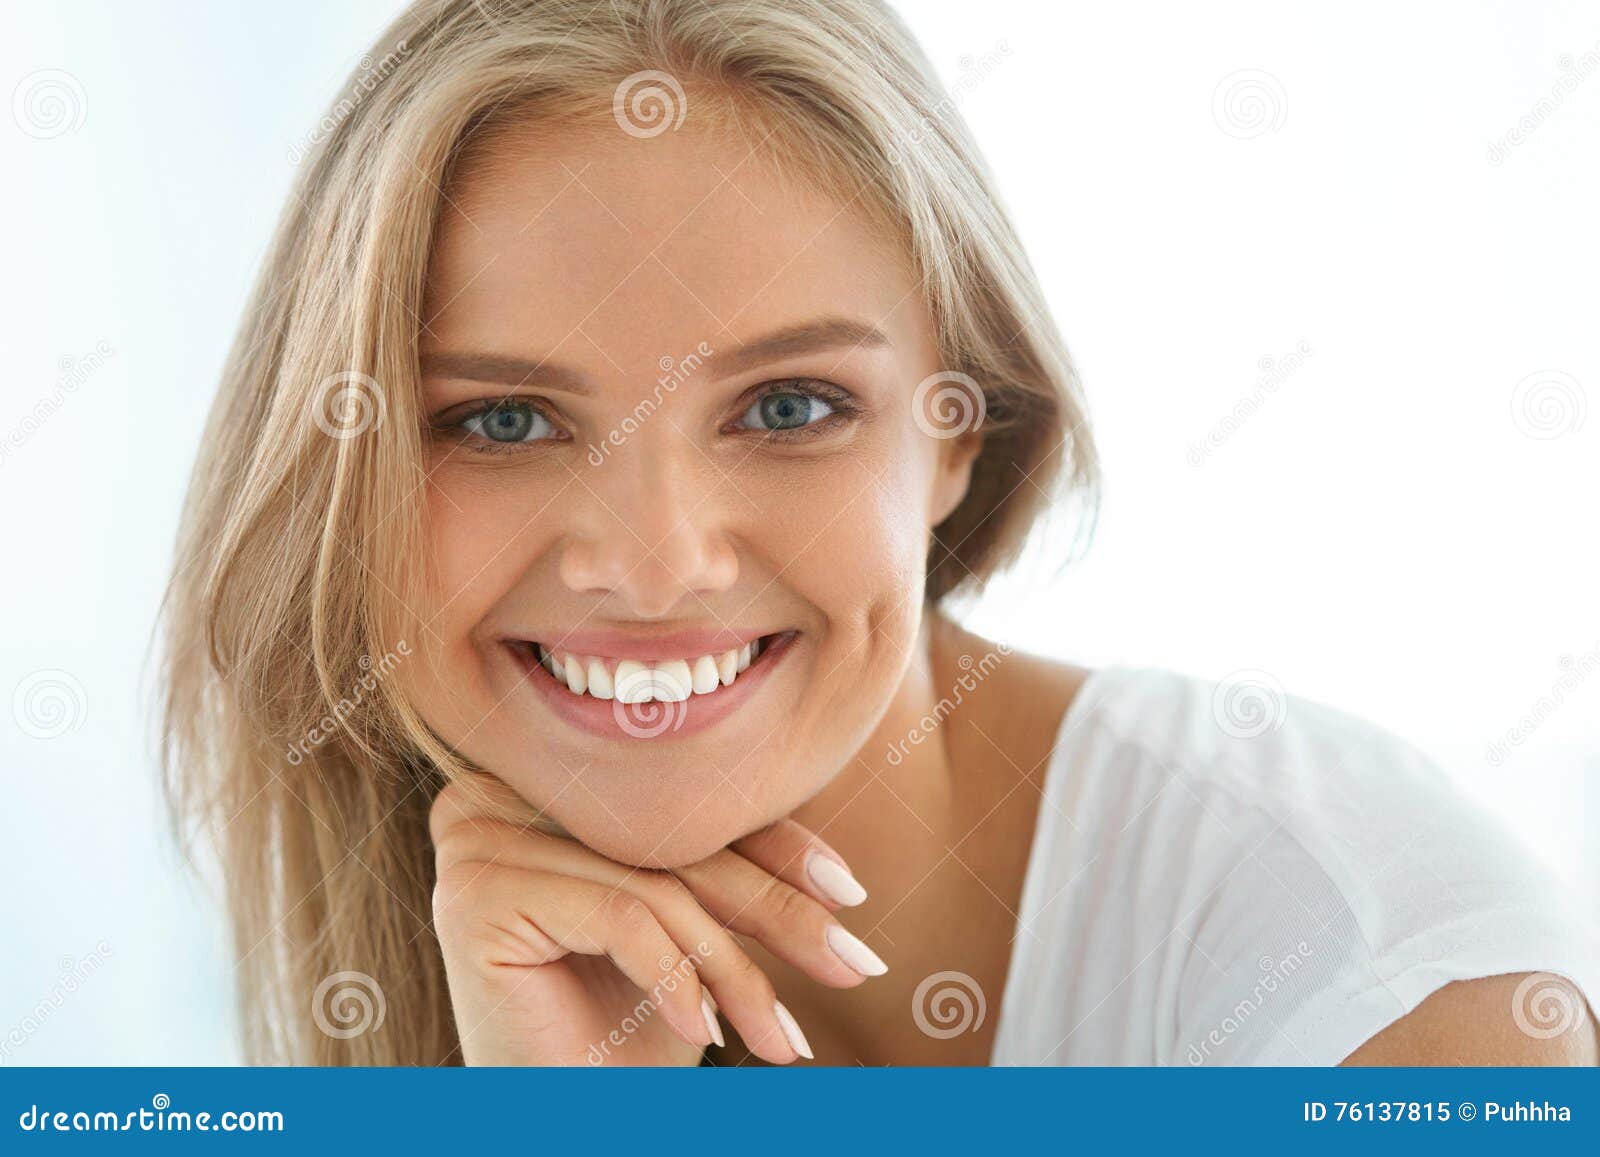 portrait beautiful happy woman with white teeth smiling. beauty